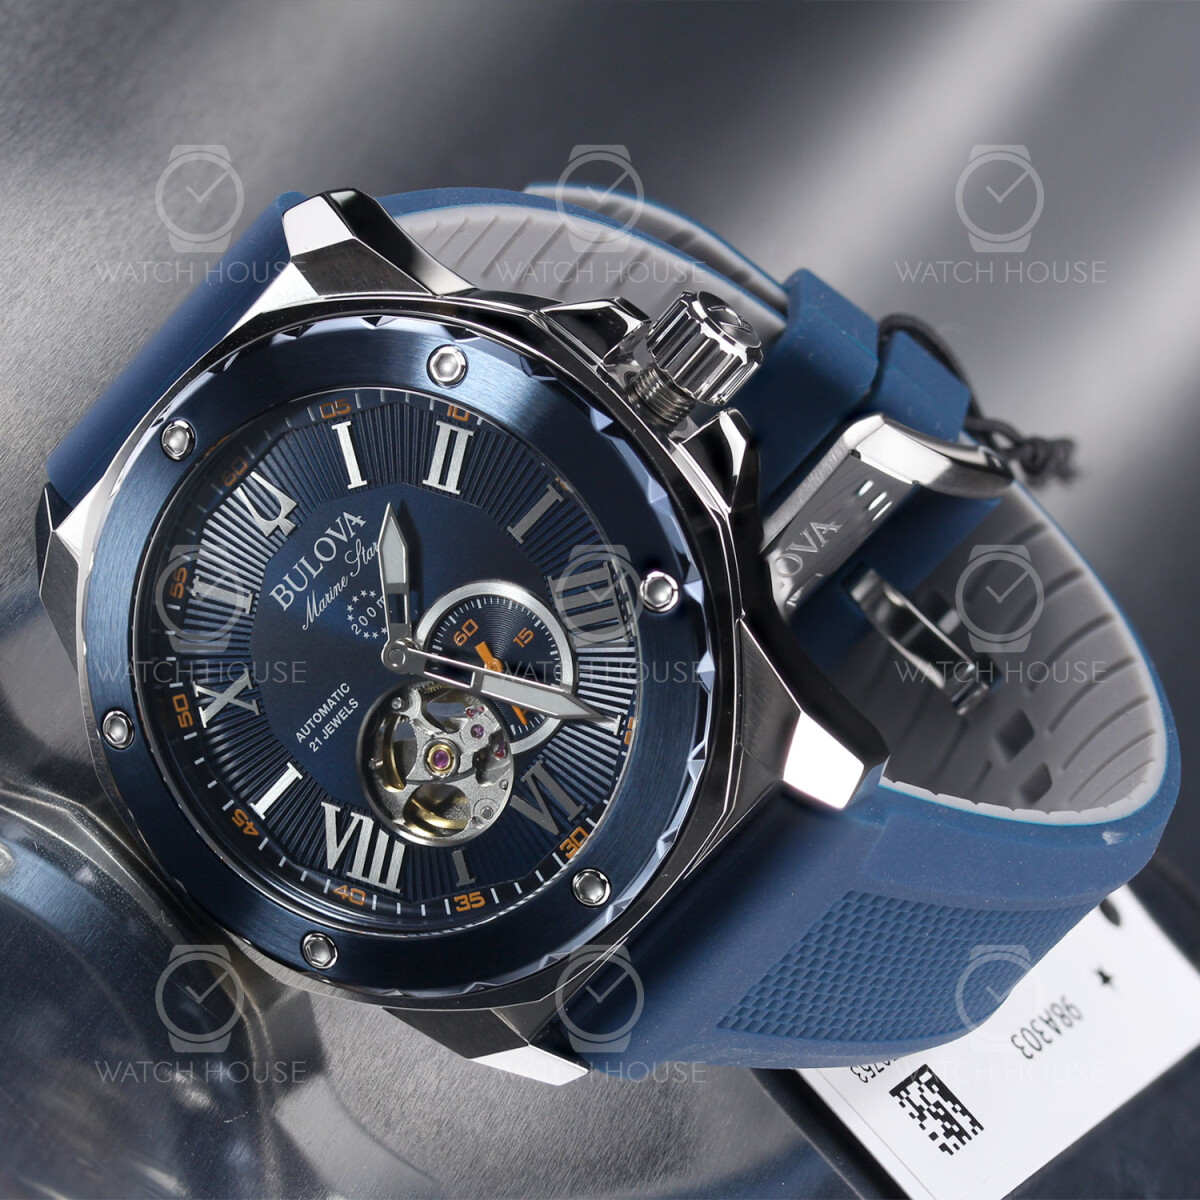 Bulova Marine in decentralized Star 98A303 seconds Automatic navy blue